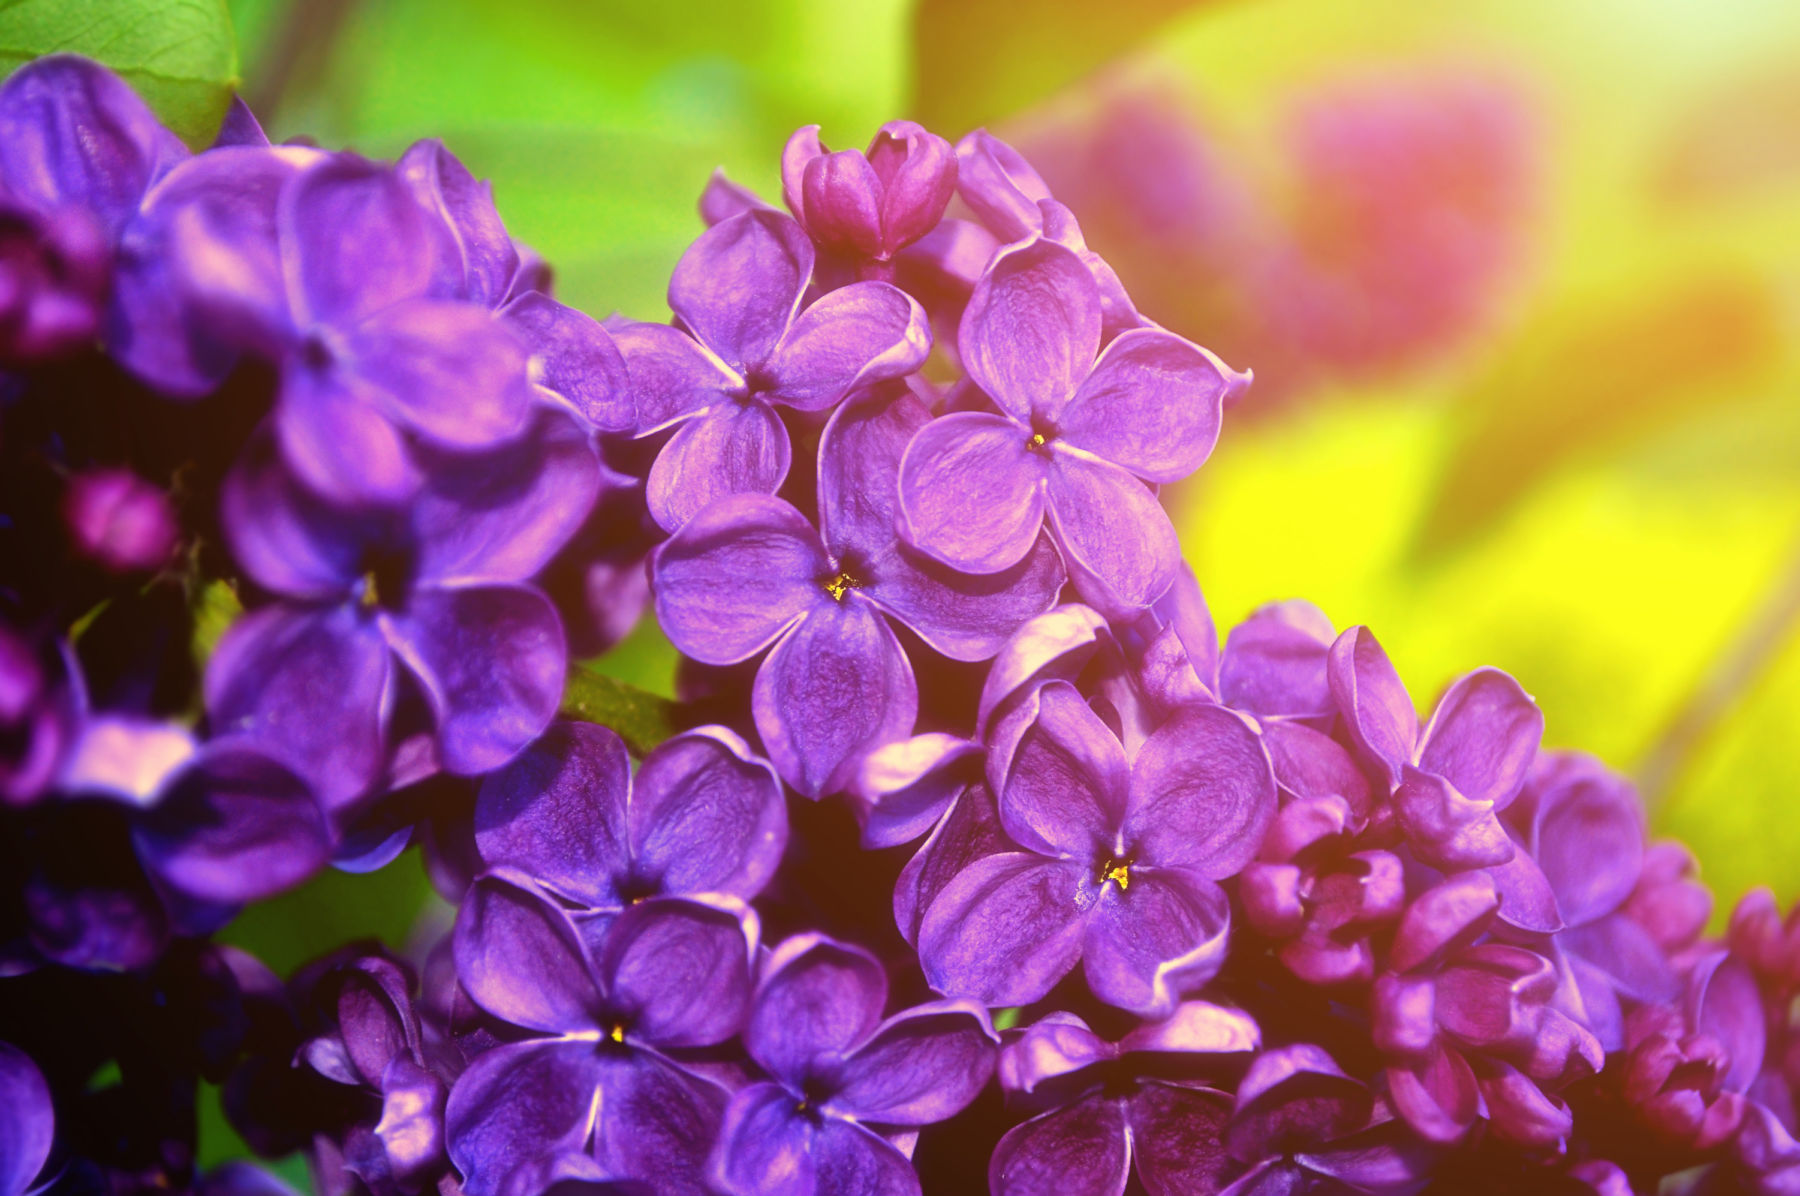 Blooming spring lilac flowers - spring floral background. Selective focus at the central spring lilac flowers, soft focus processing. Spring background with spring lilac flowers. Spring nature